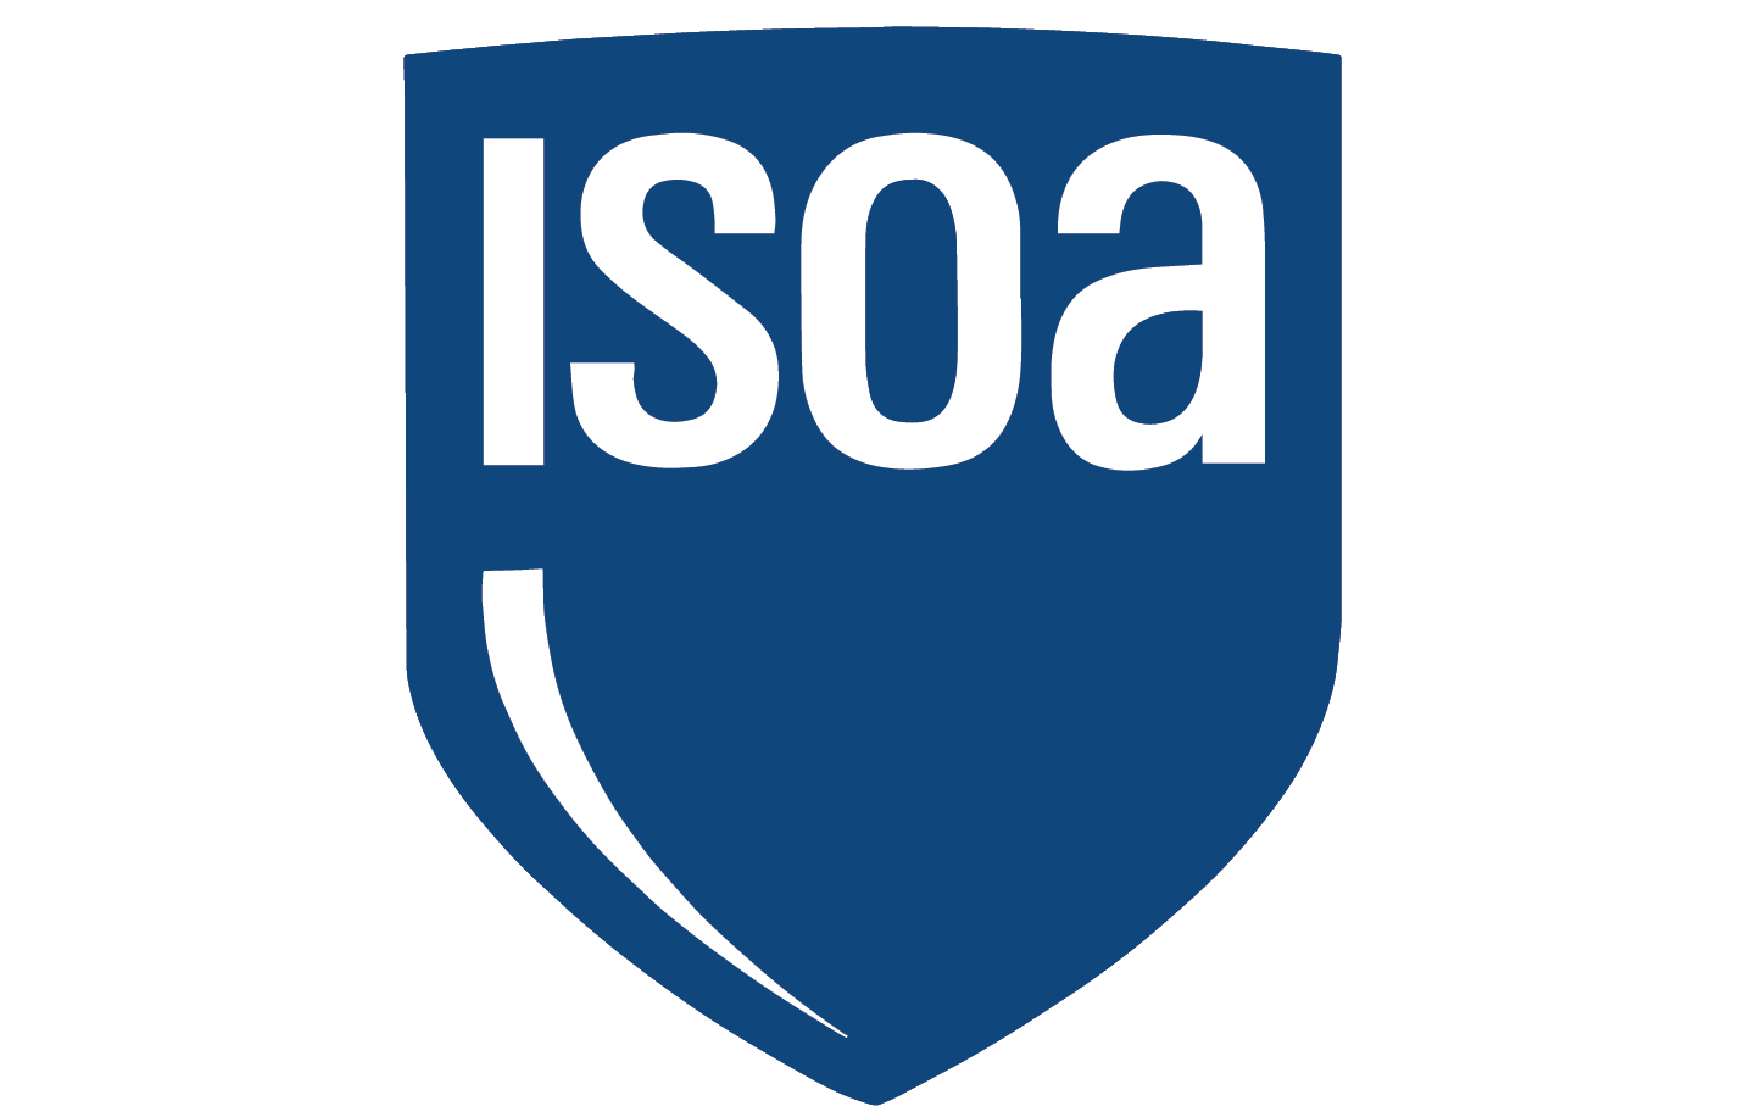 The logo of the ISOA association which precision talent solutions is a part of.